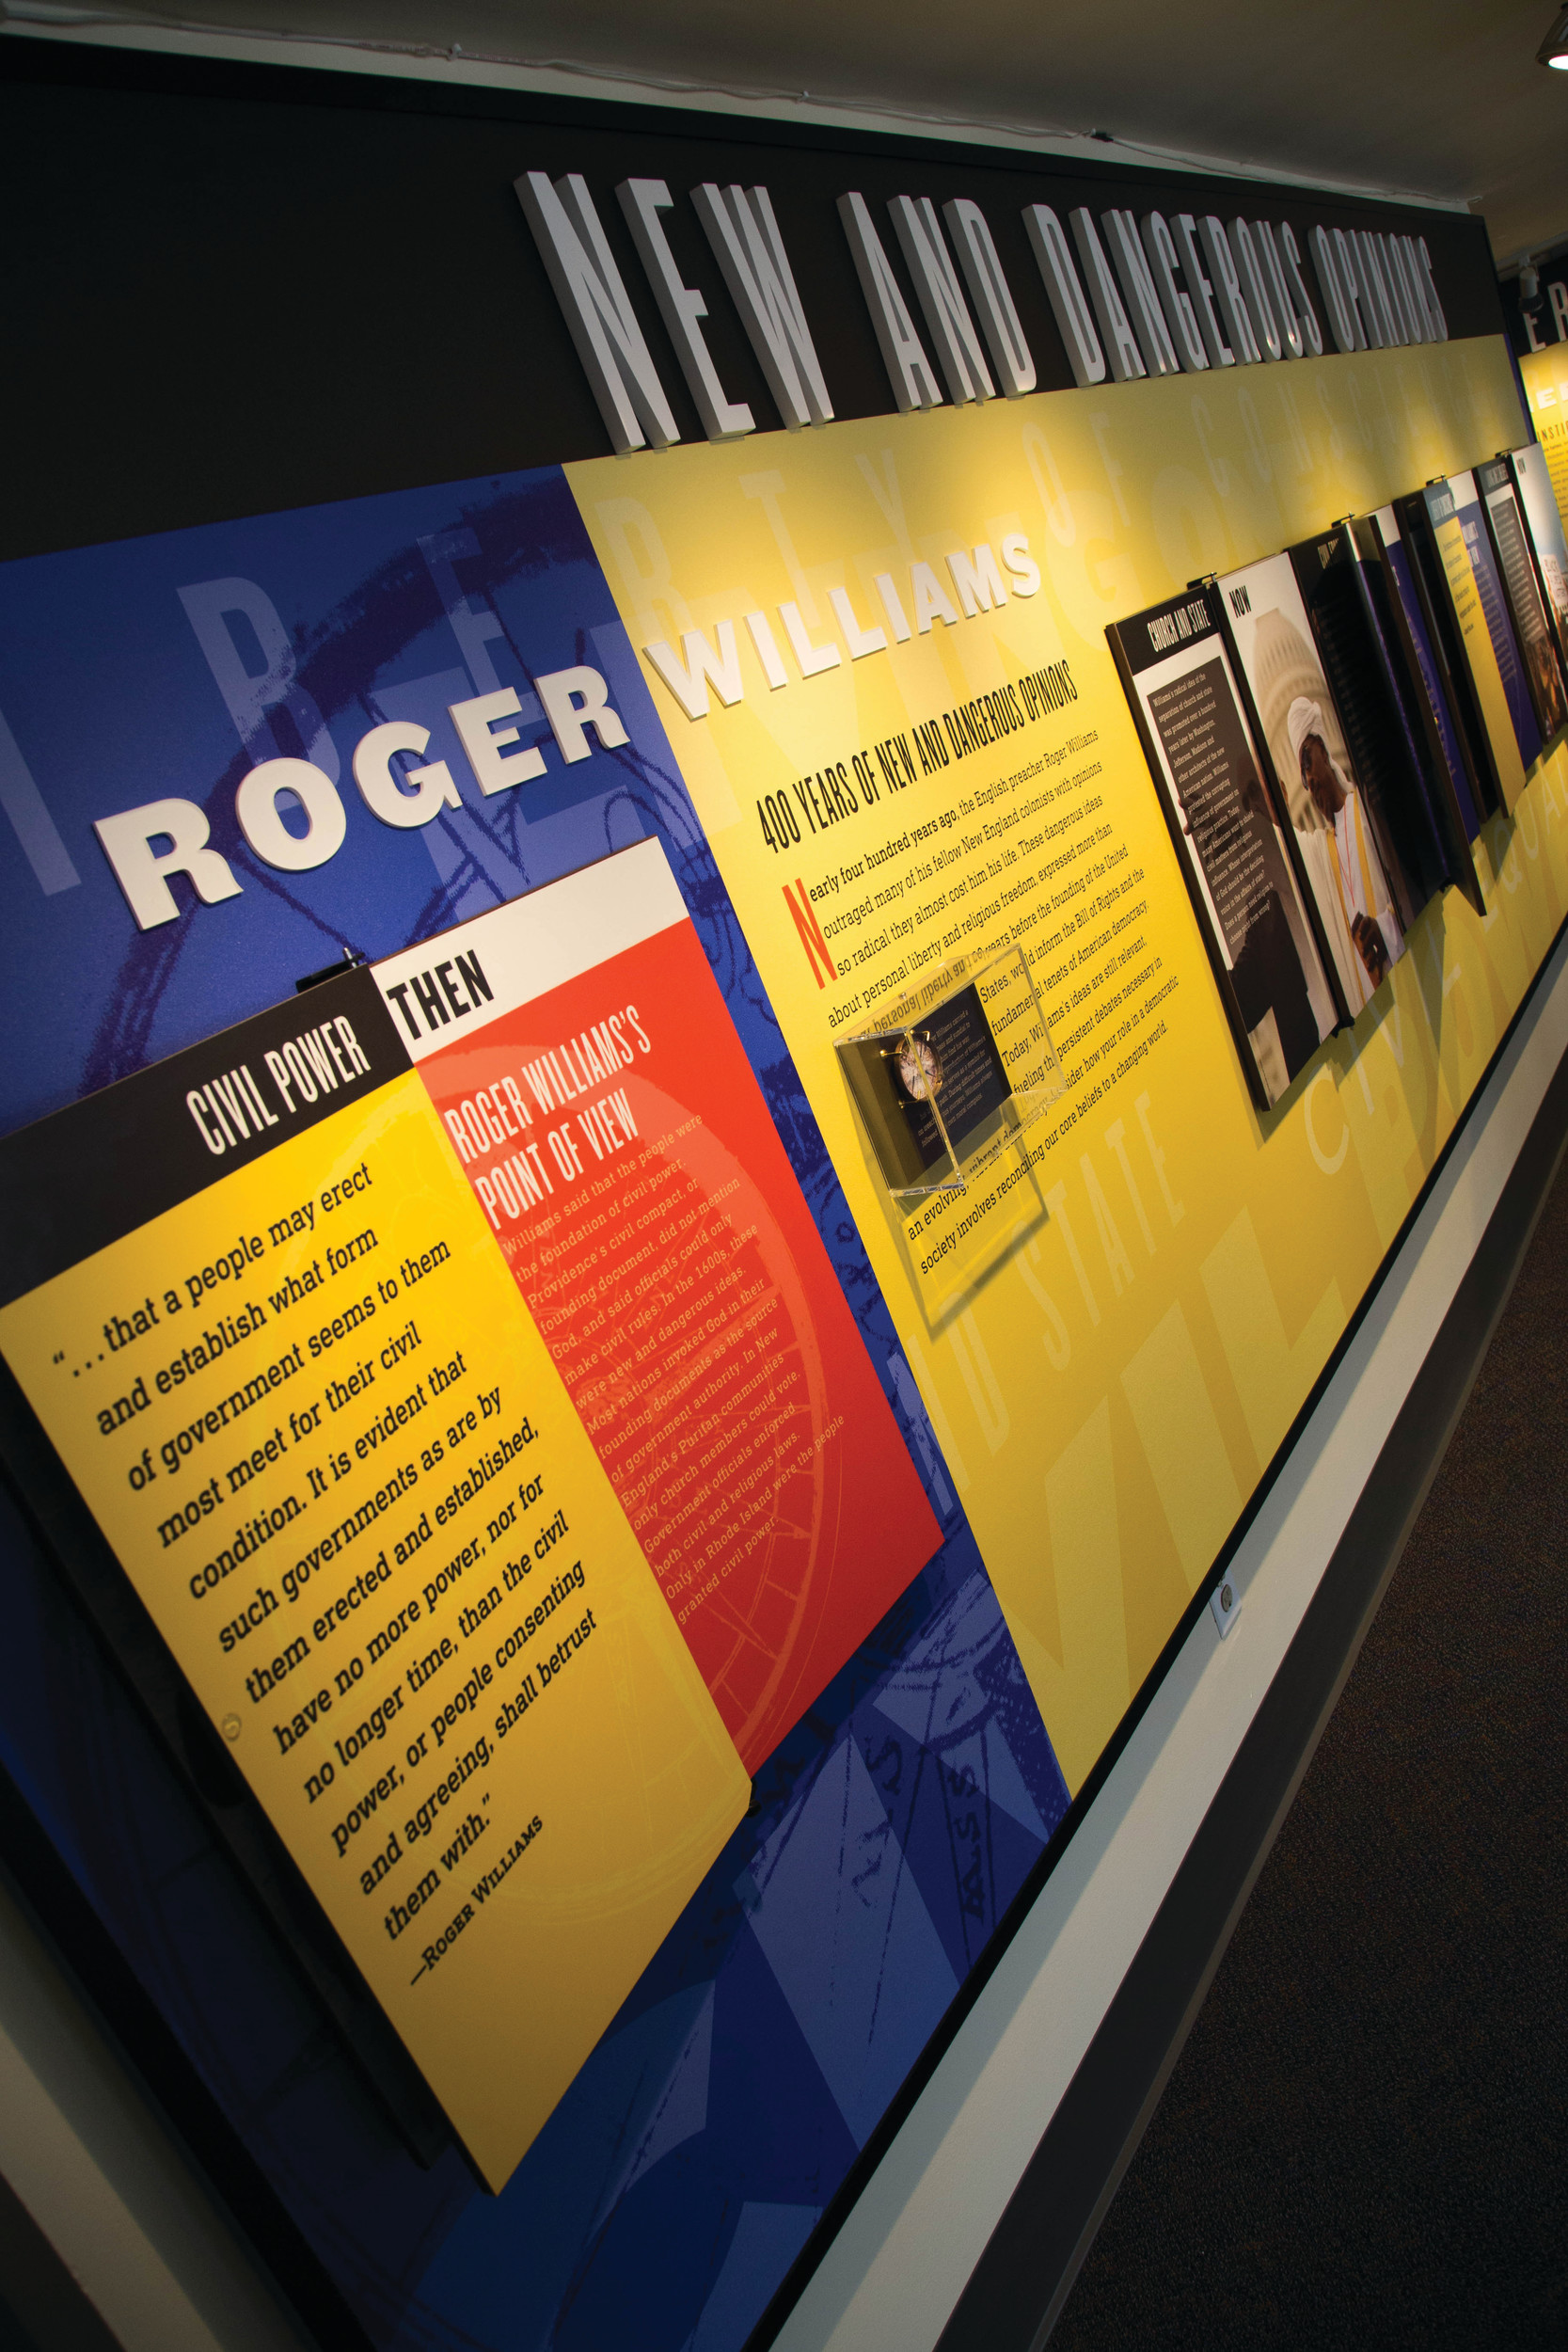 New and Dangerous Opinions, an exhibit at the Roger Williams National Memorial, reveals how the Rhode Island founder's ideas are more relevant than ever